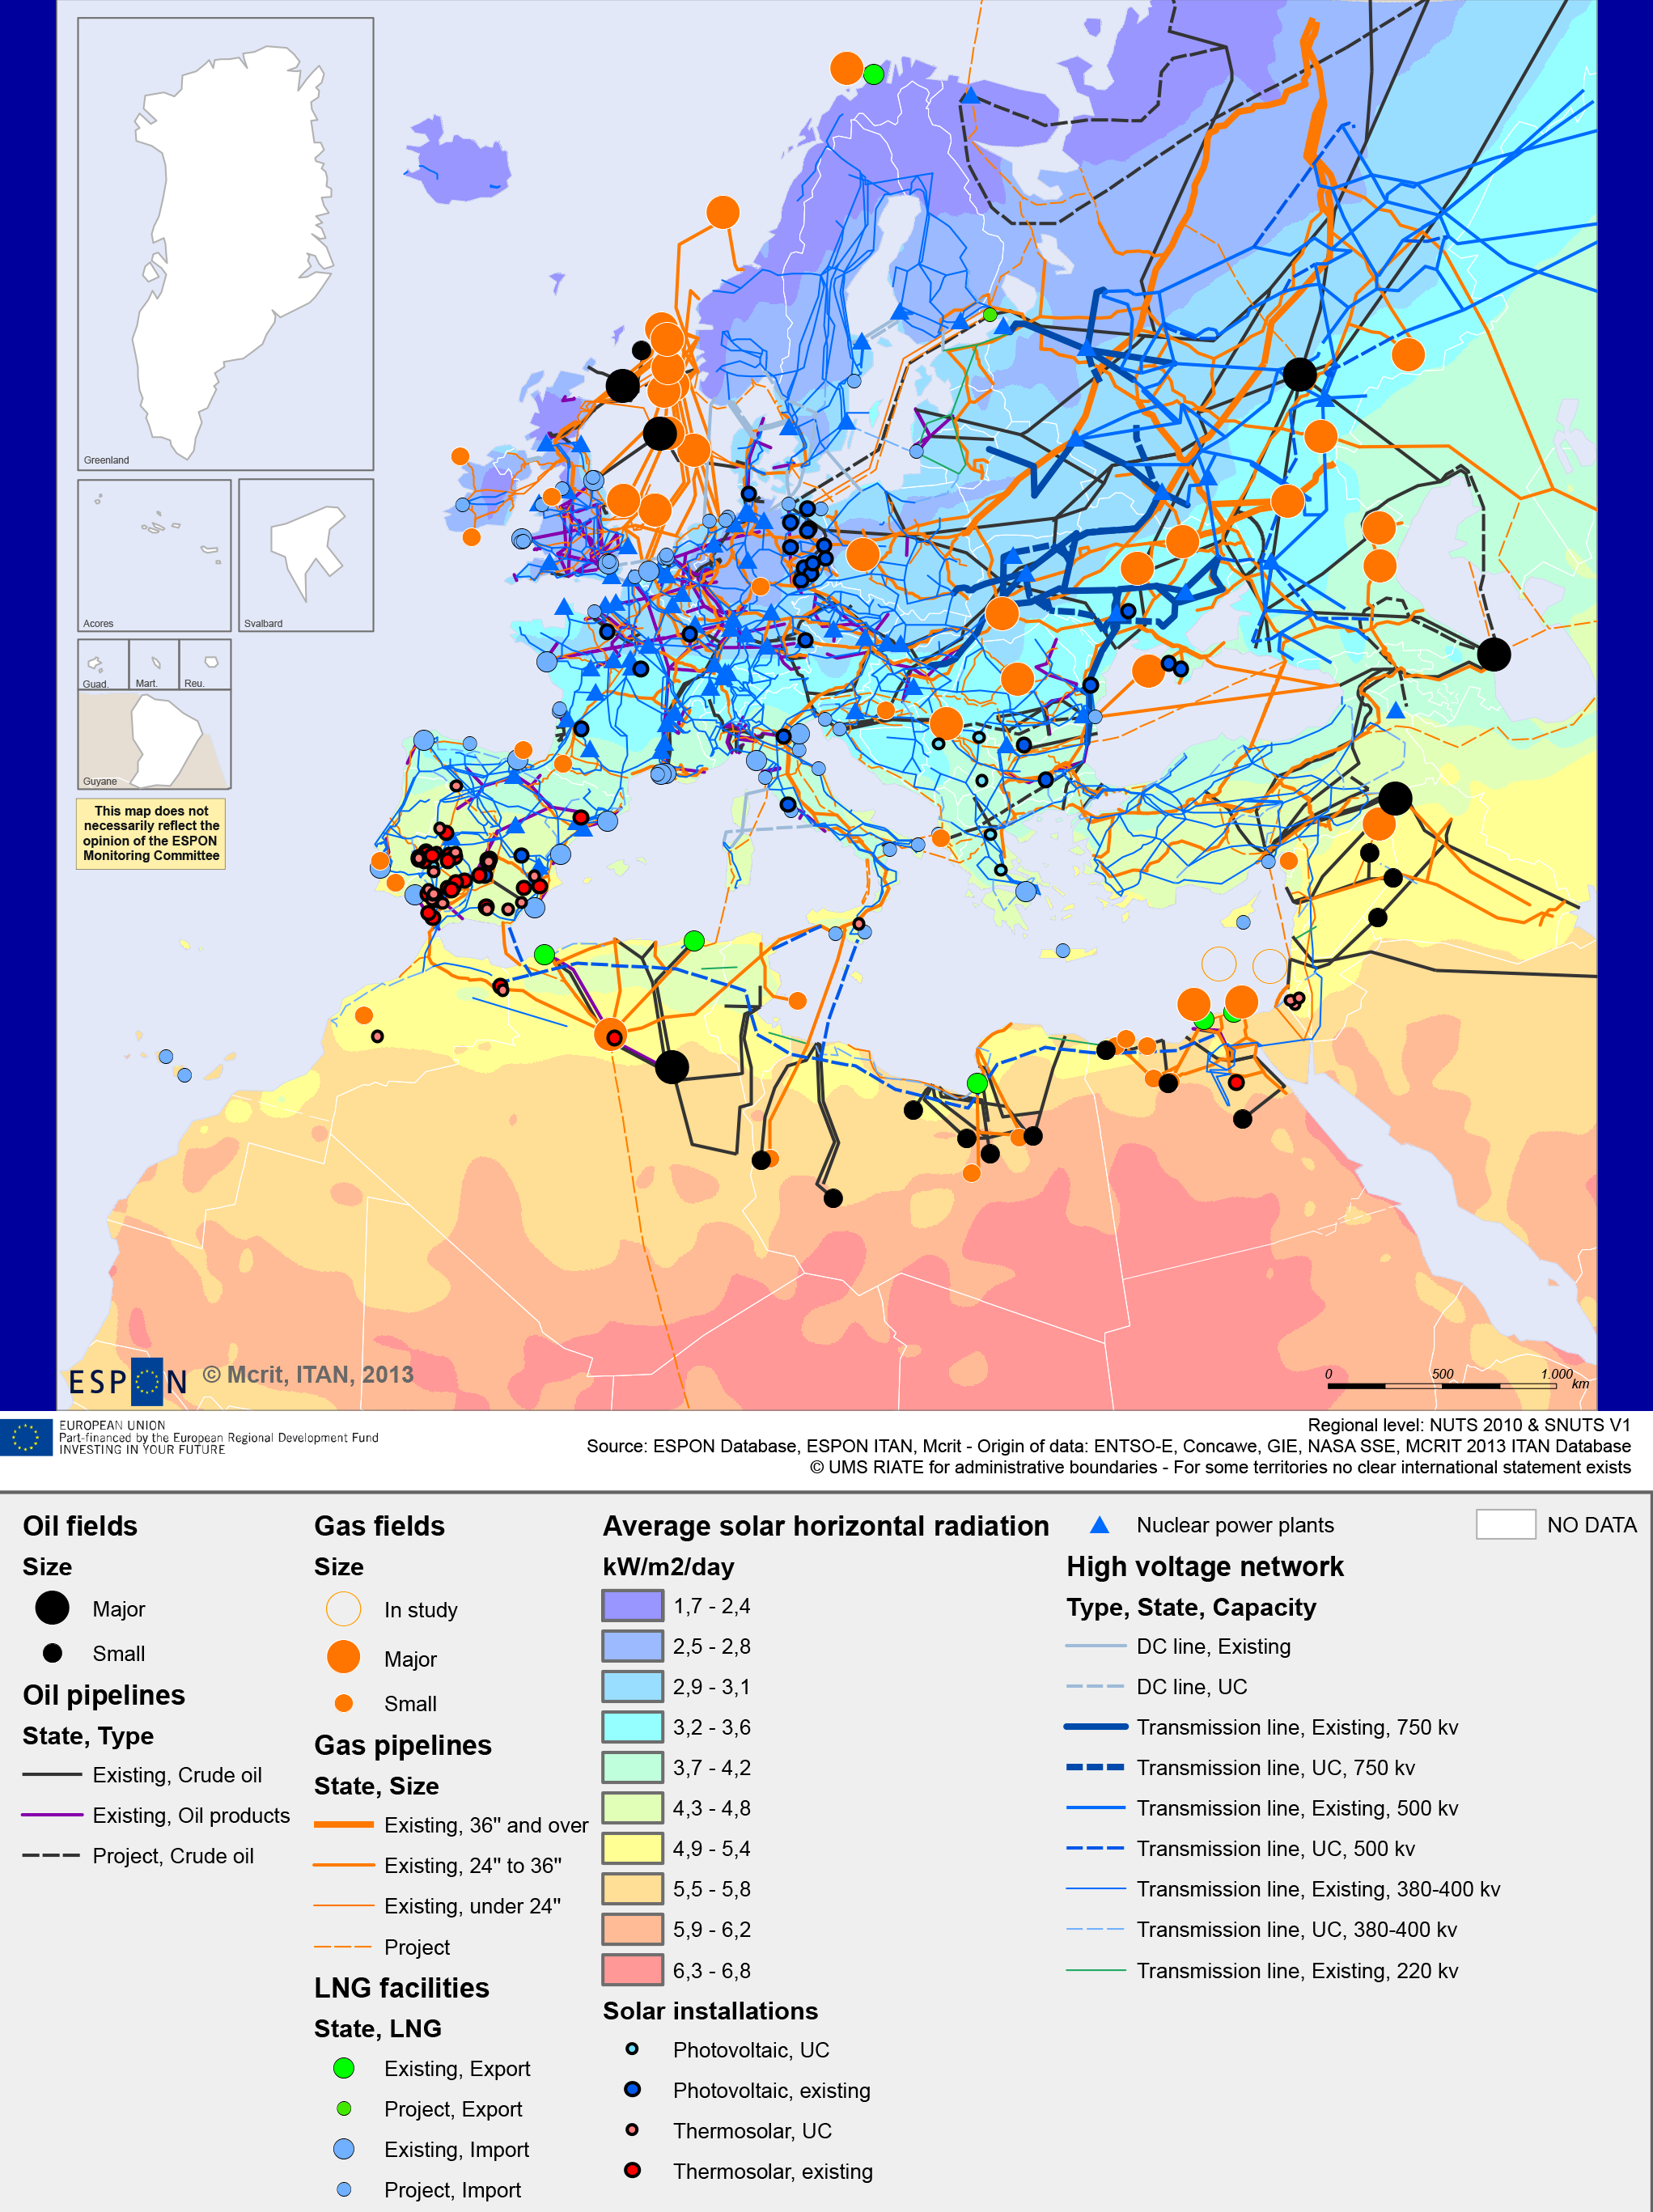 Map 3. Energy networks in the wider European region, ca 2010